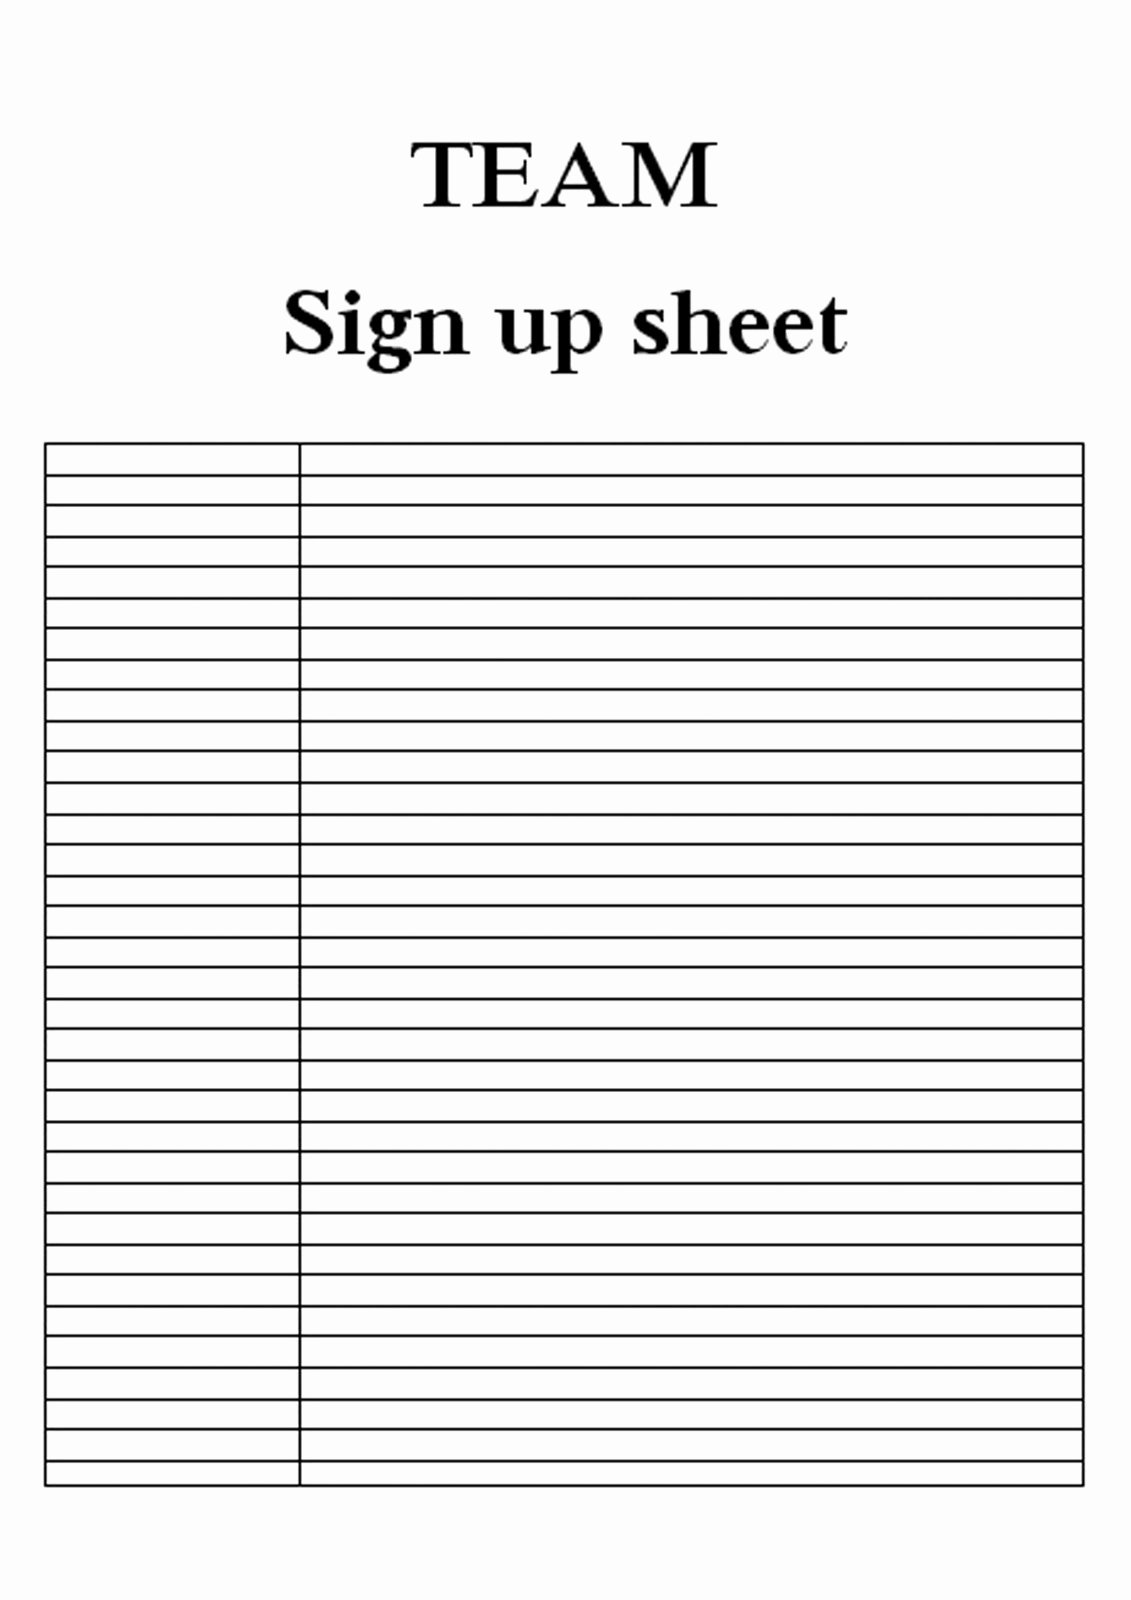 Time Sign Up Sheet Template Beautiful Potluck Sign Up Sheet Word for events